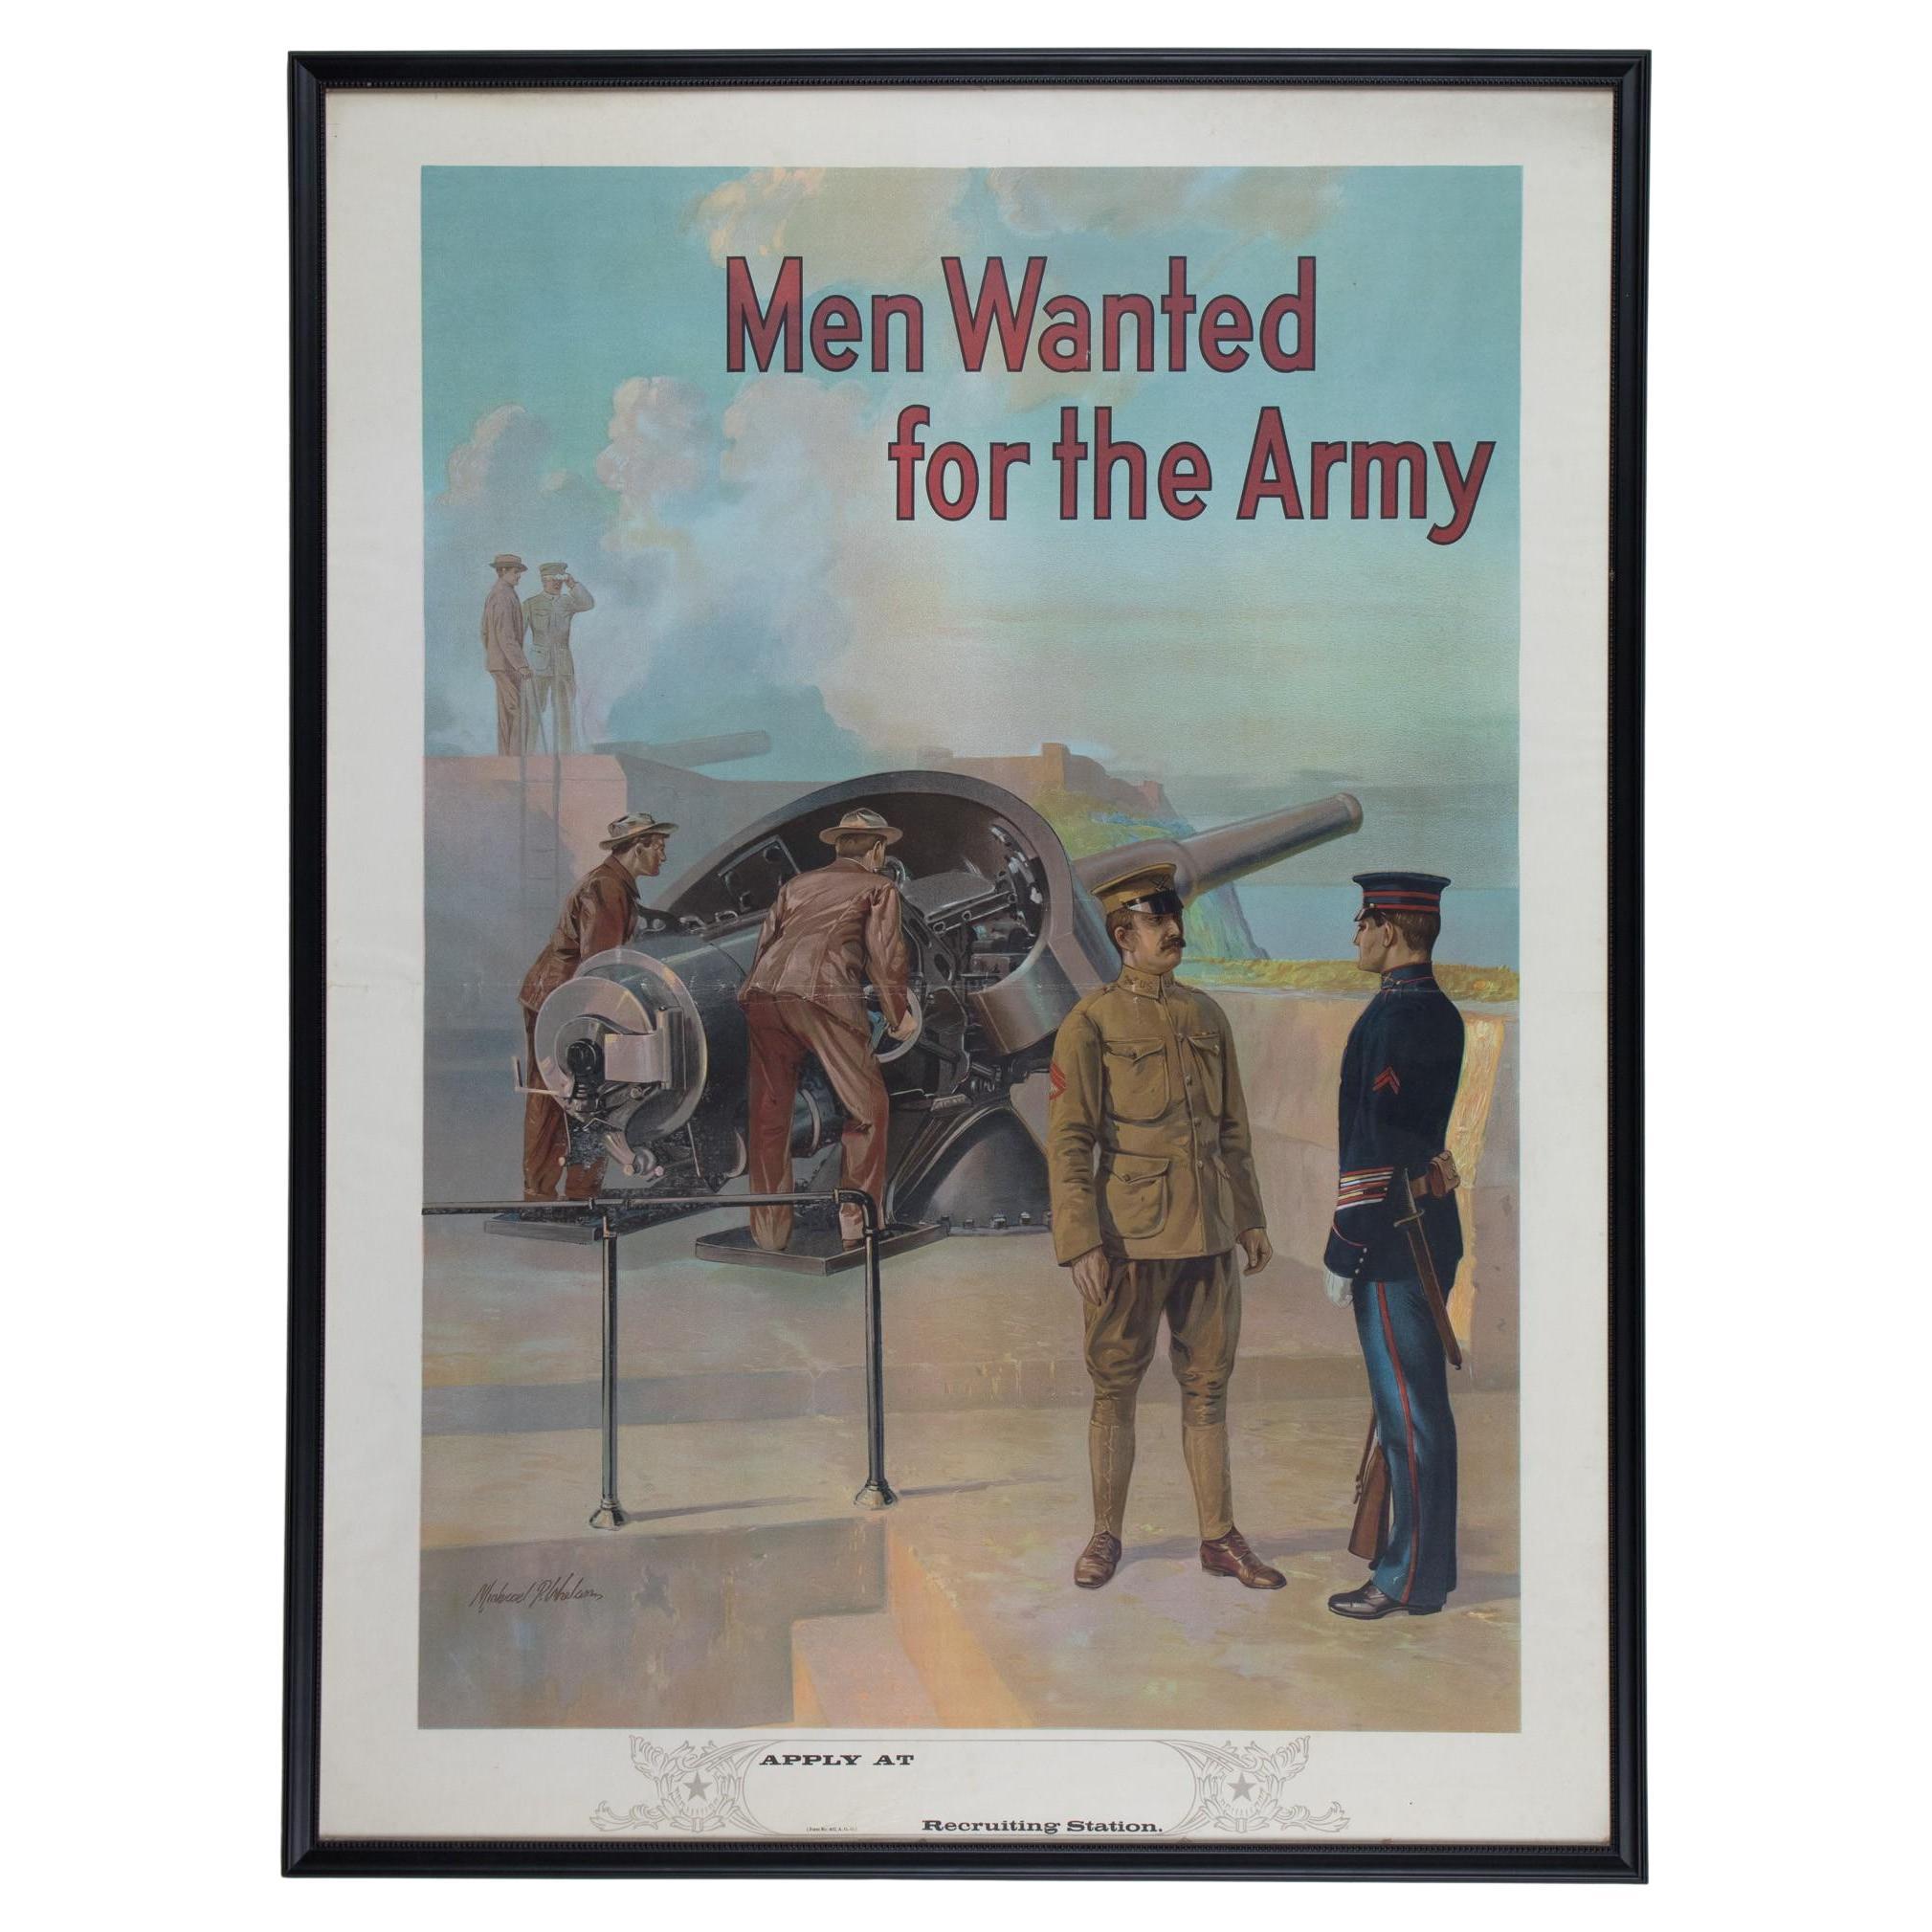 "Men Wanted For the Army" Vintage WWI Recruitment Poster